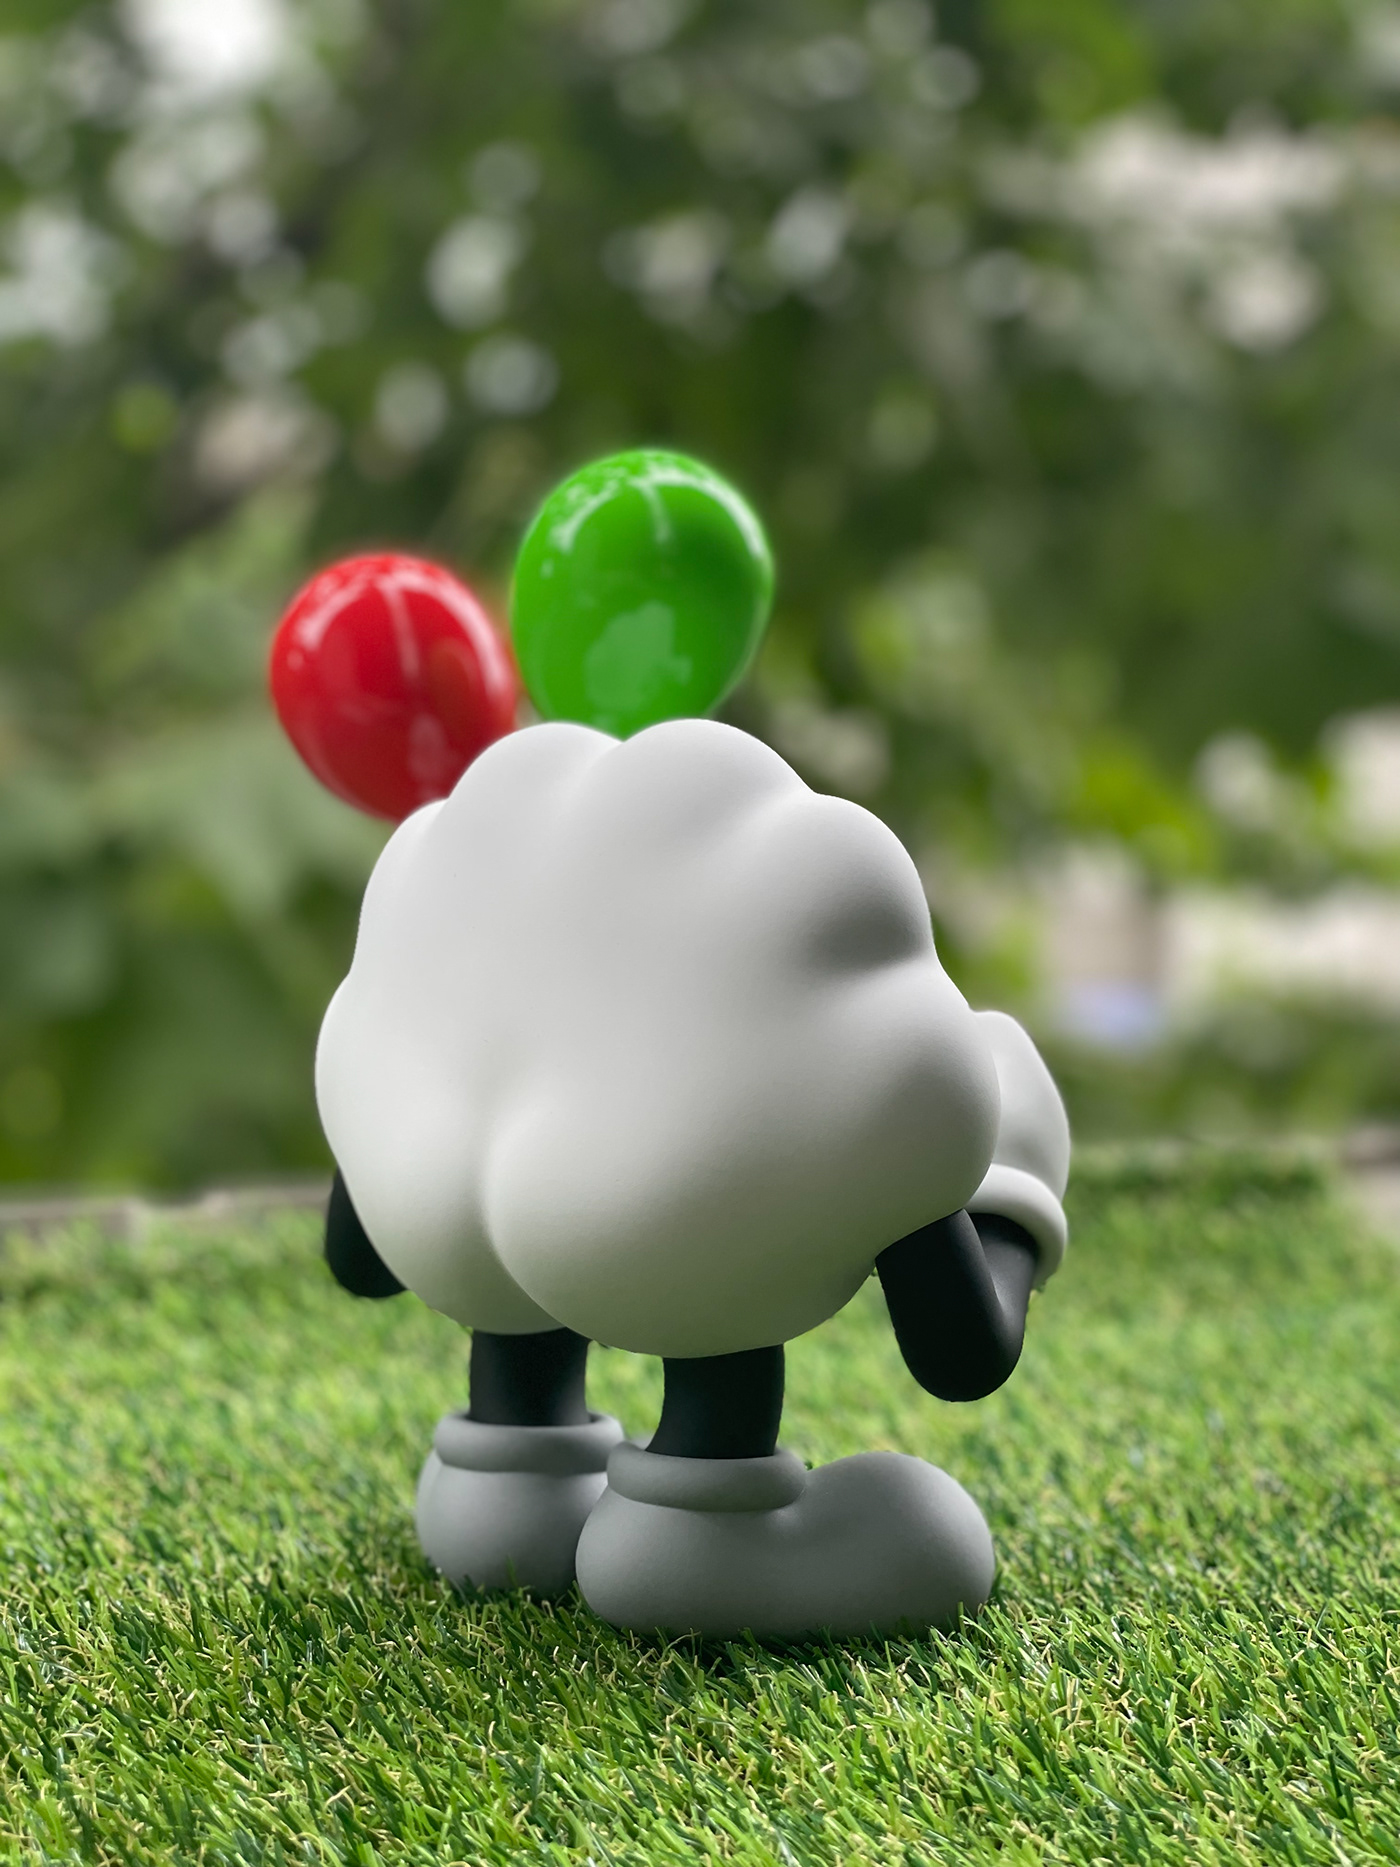 arttoy art toy cloud Character modeling 3D Collection emotion weather rendering designertoy resintoy